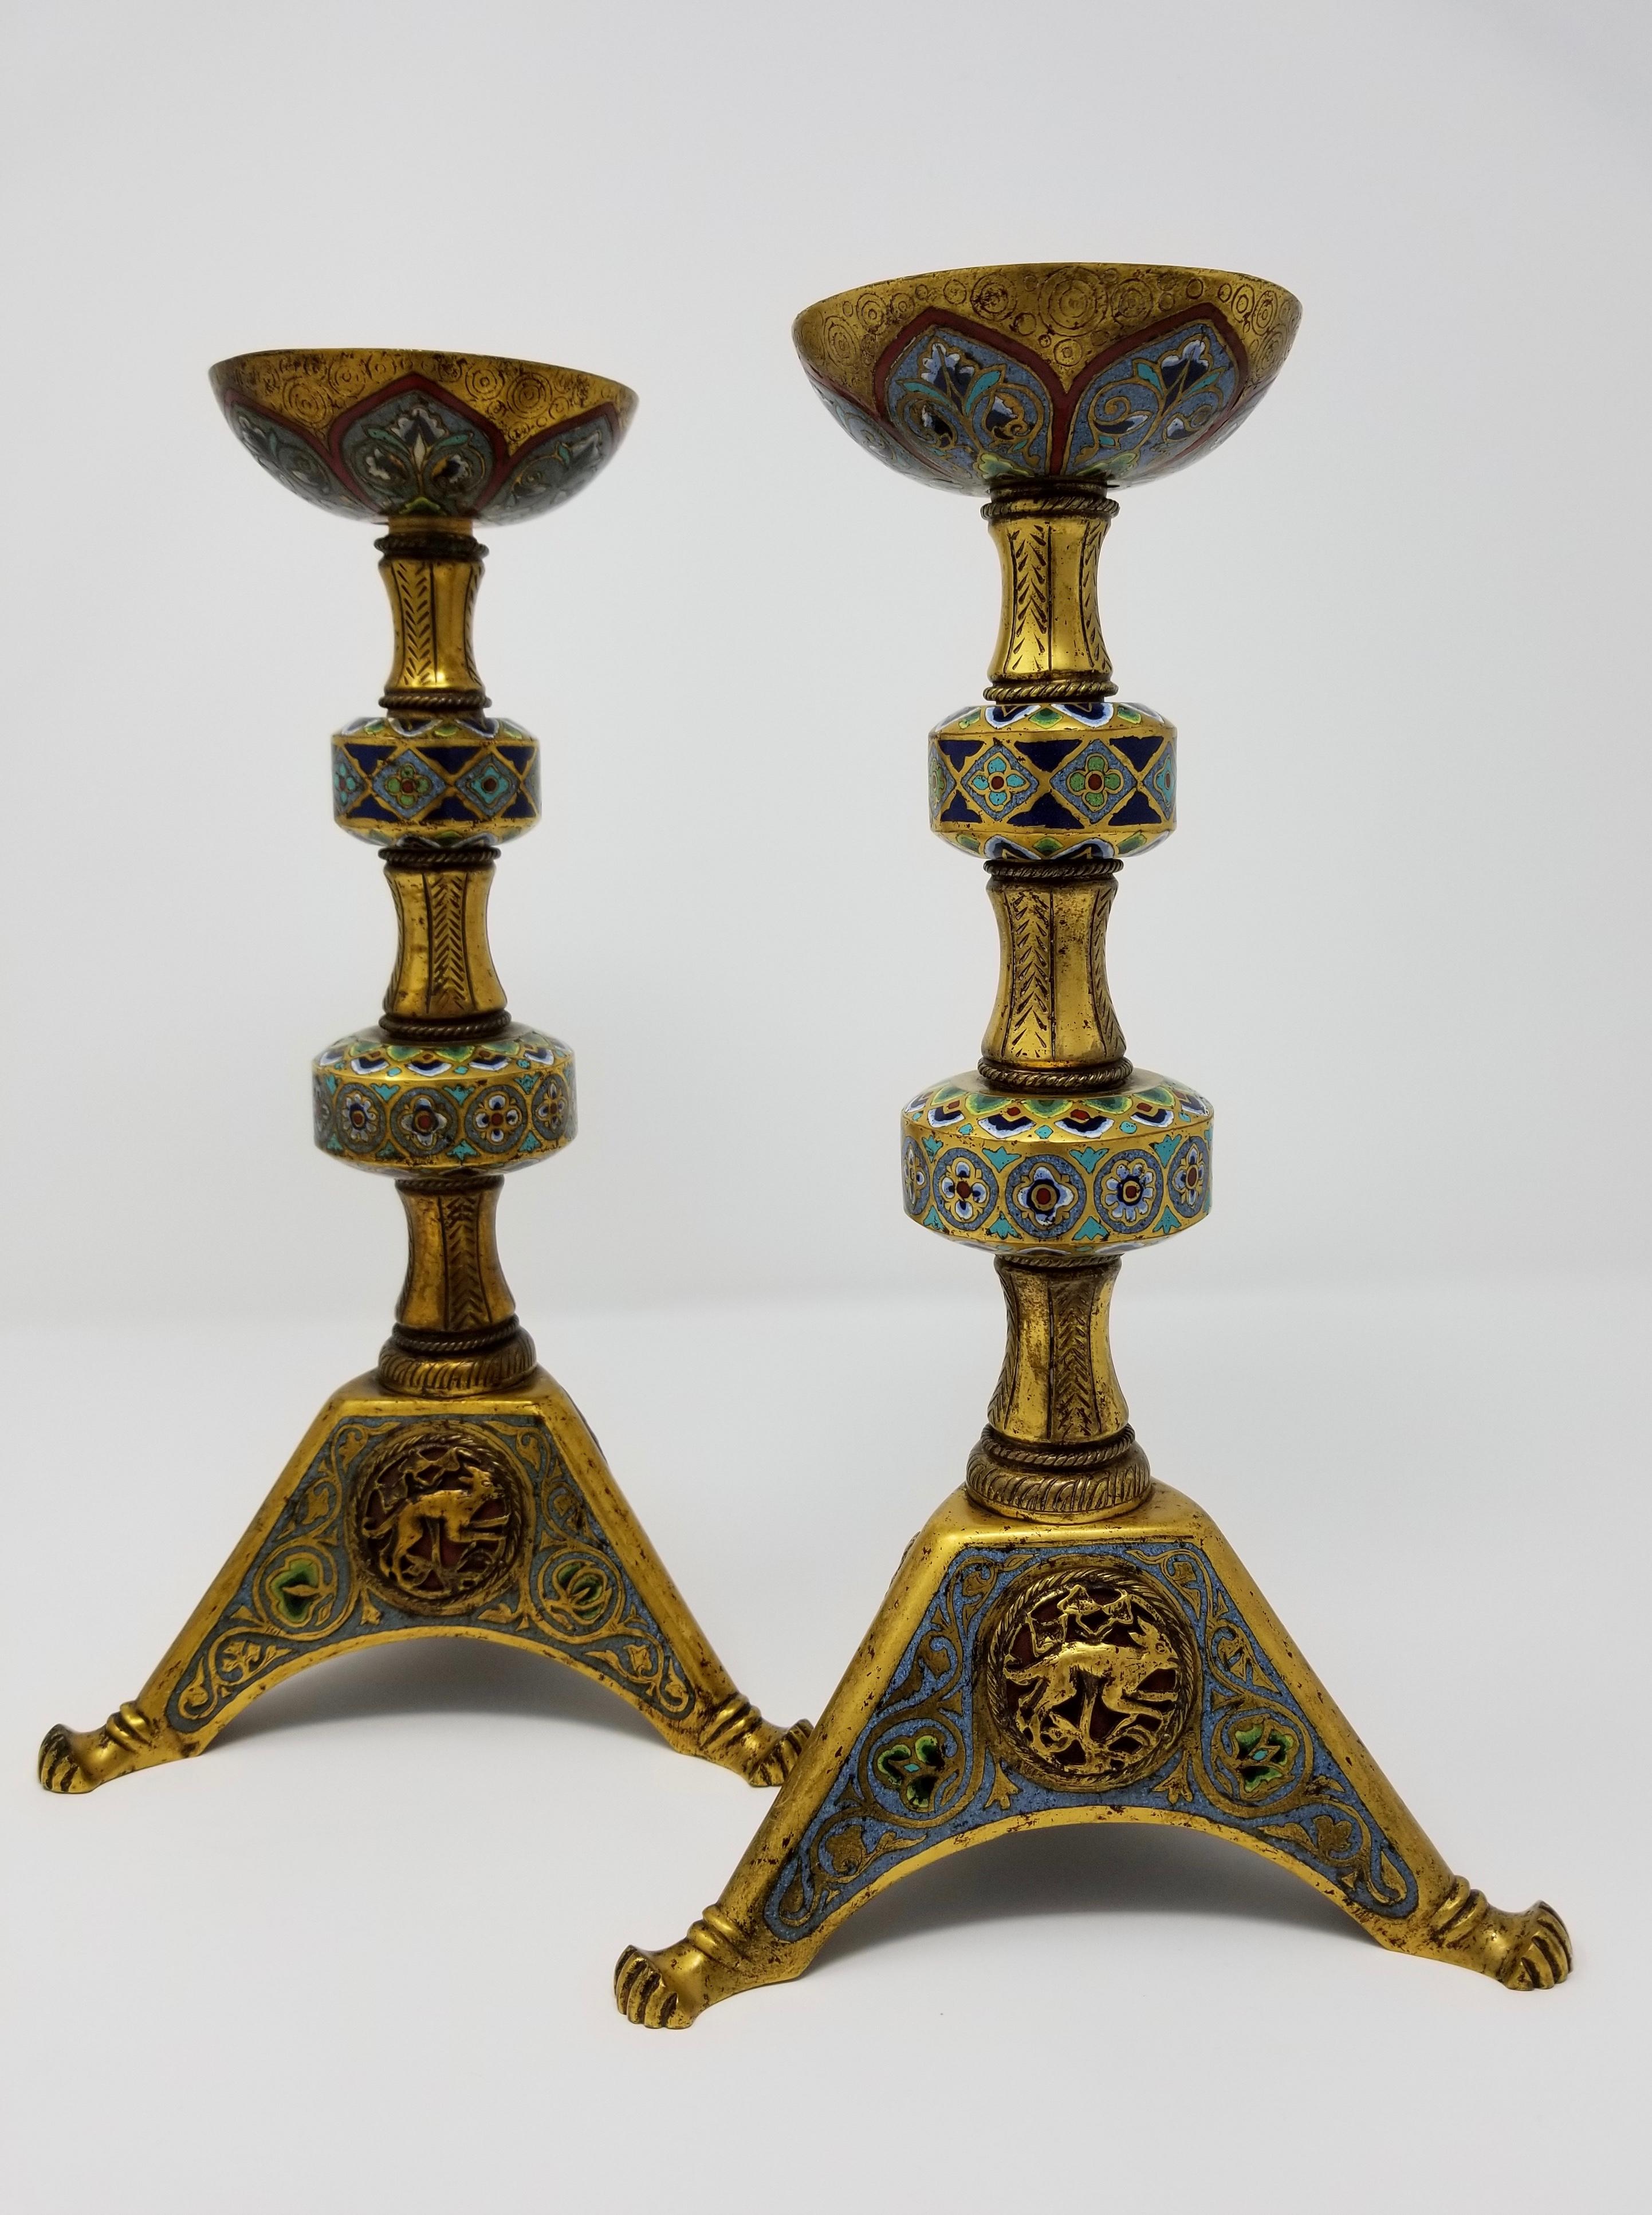 A very fine and unusual pair of antique bronze and champlevé enamel candlesticks/lamps, by E. F. Caldwell, in the Renaissance Islamic/Orientalist taste. Around the lower base are three raised plaques with motifs of a deer, fox, and duck. Found